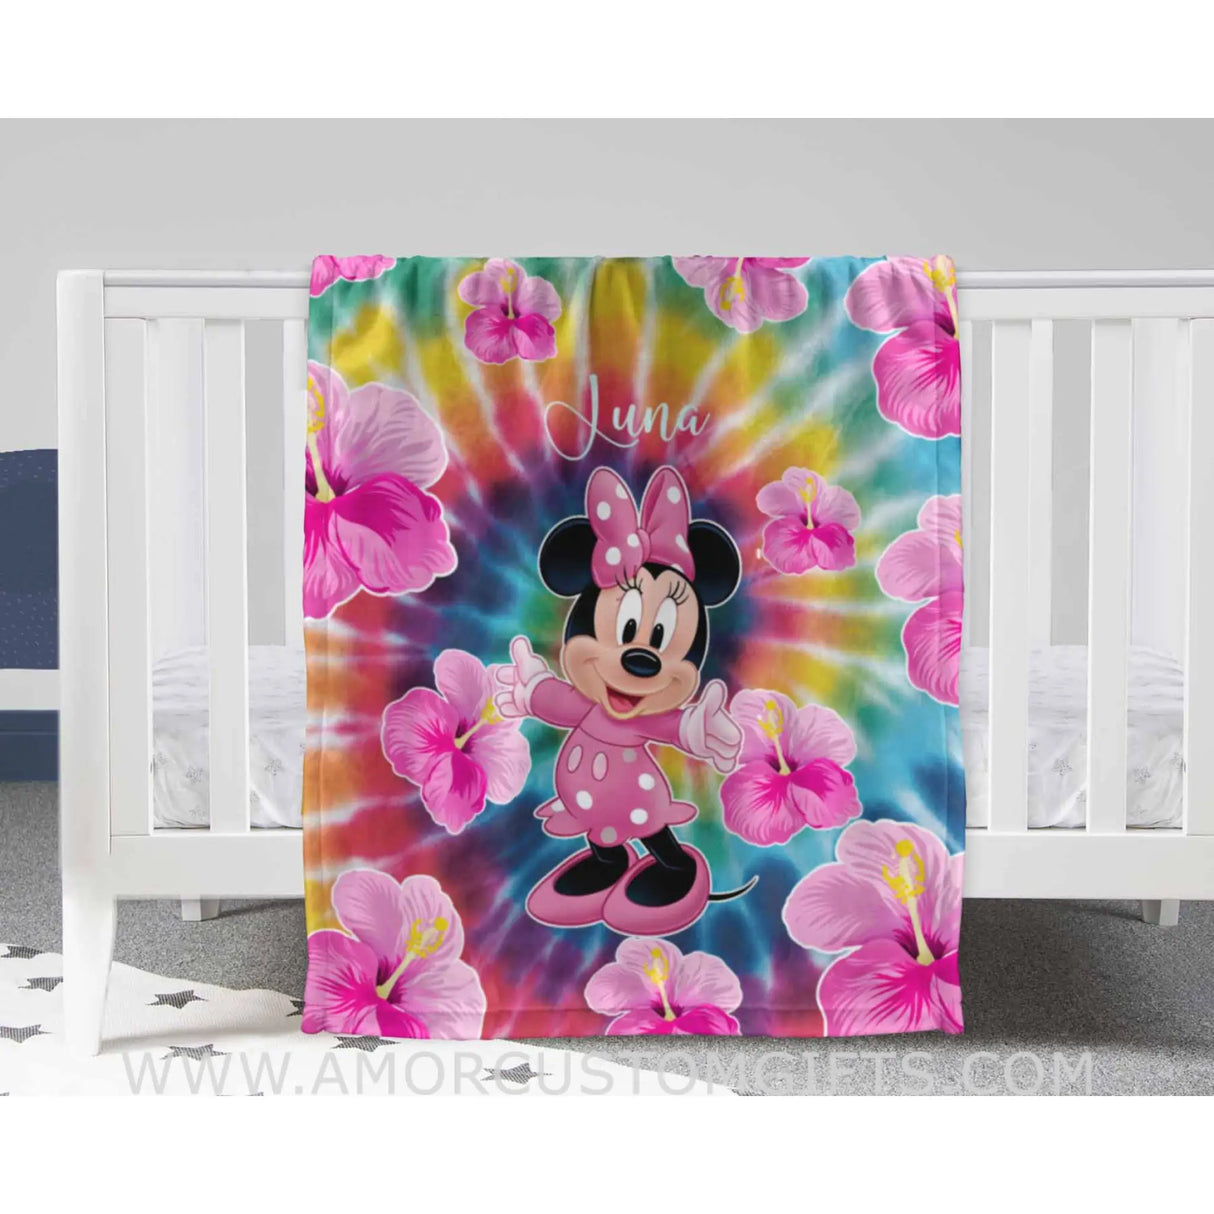 Blankets Personalized Baby Minne Mouse Colorful Blanket | Custom Name Blanket For Baby Girl